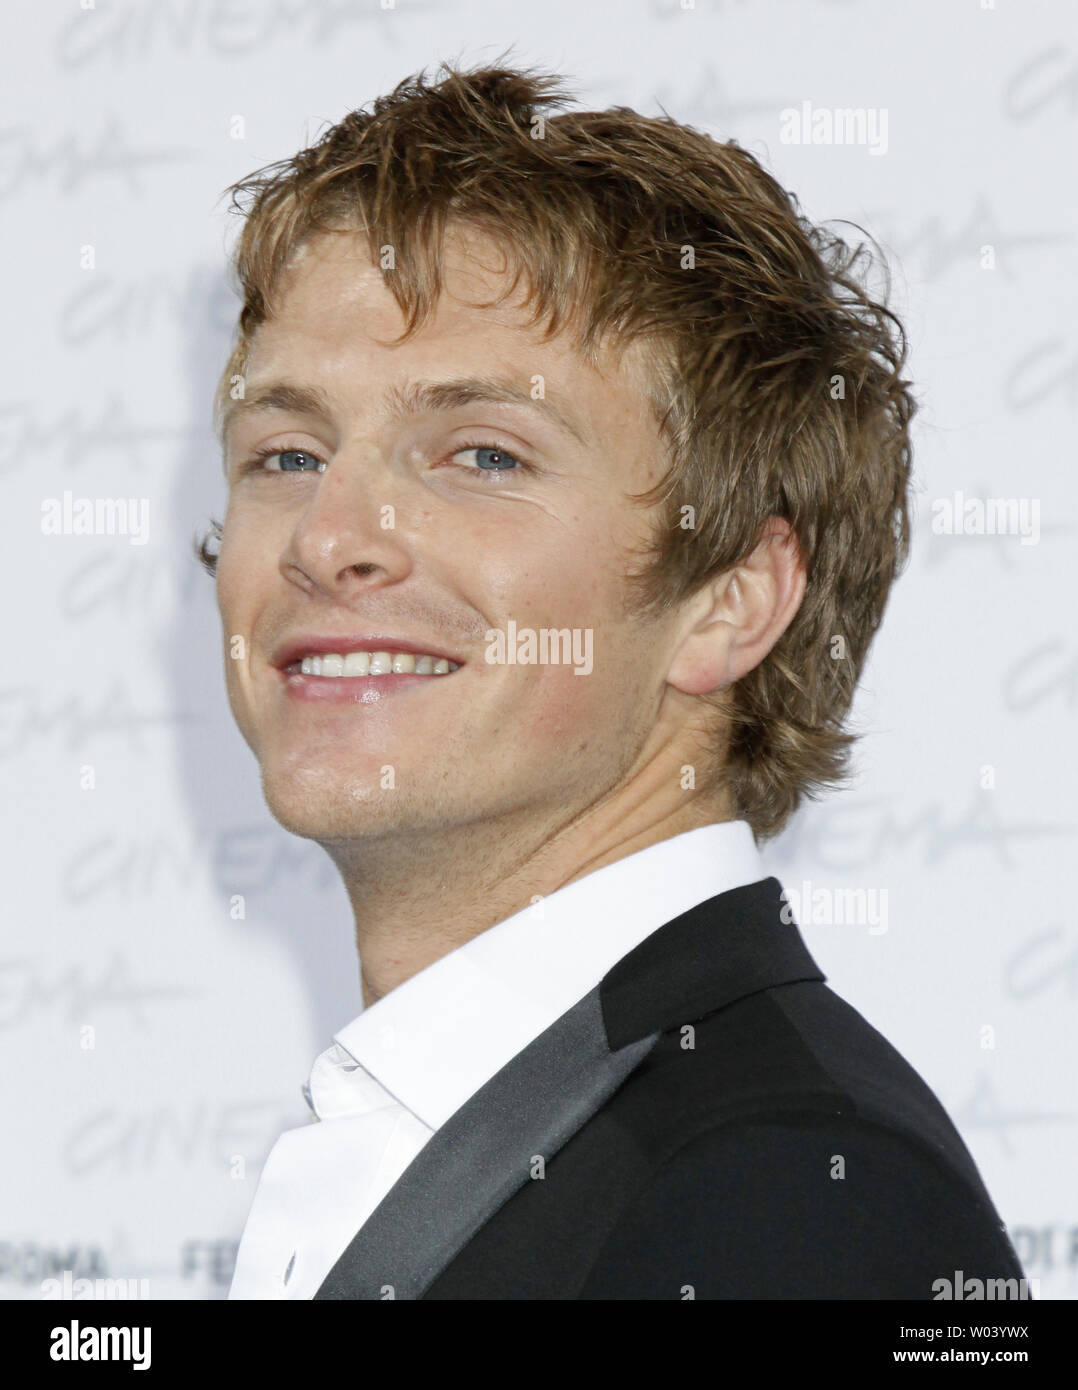 Charlie Bewley arrives at a photocall for the film 'The Twilight Saga: New Moon' during the 4th Rome International Film Festival in Rome on October 22, 2009.   UPI Photo/David Silpa Stock Photo